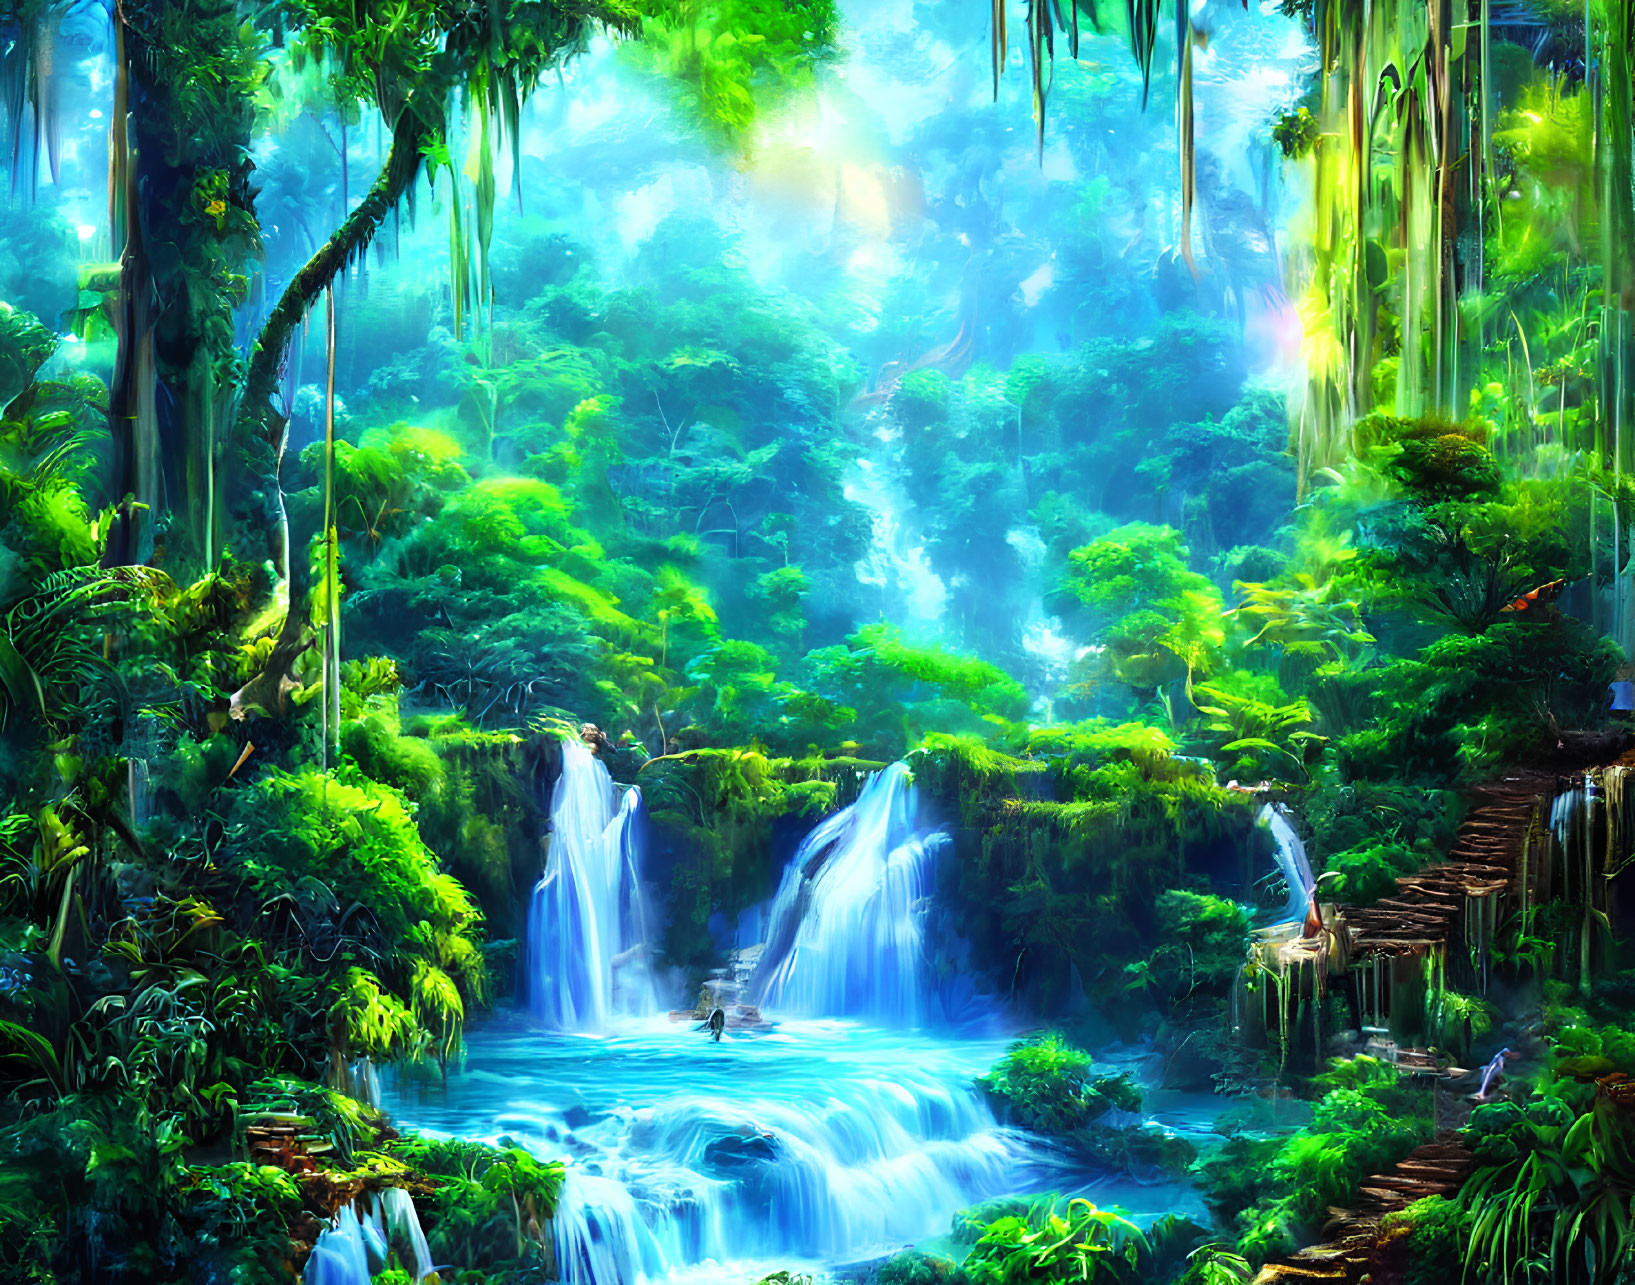 Serene forest scene with lush greenery and cascading waterfall